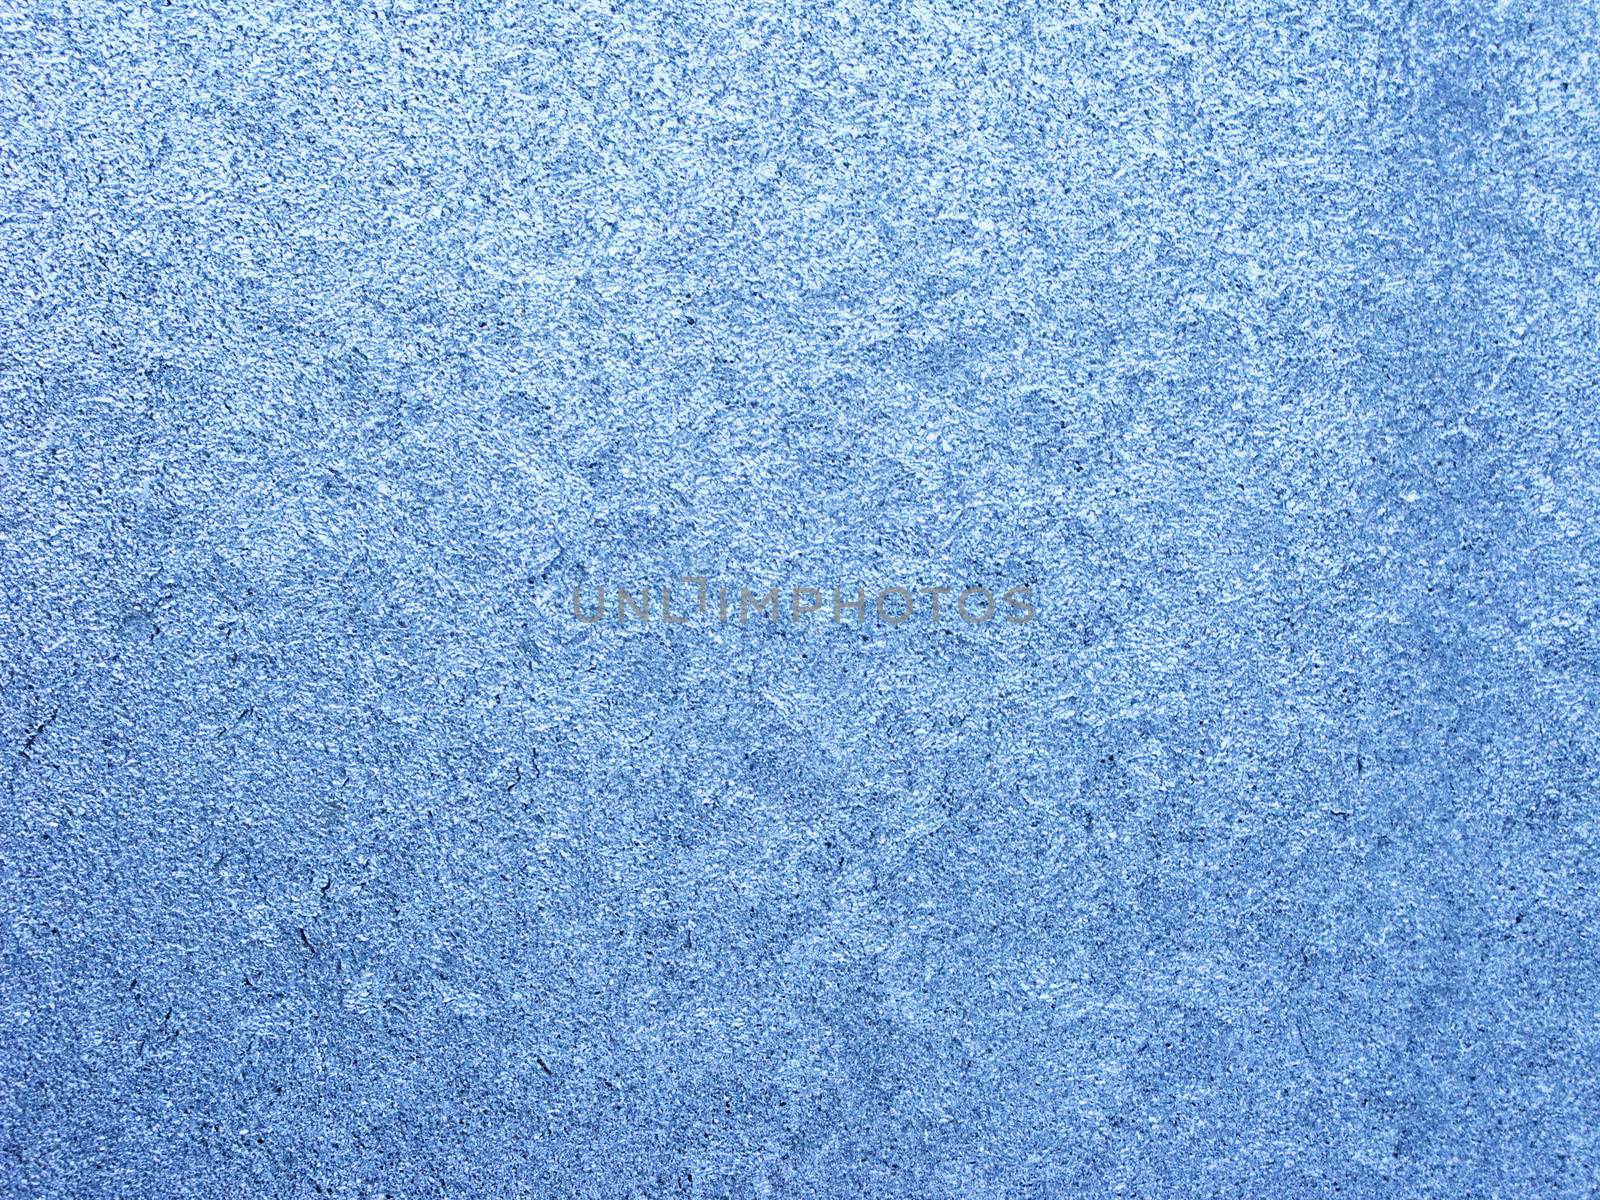 Blue sky behind frosted glass texture background